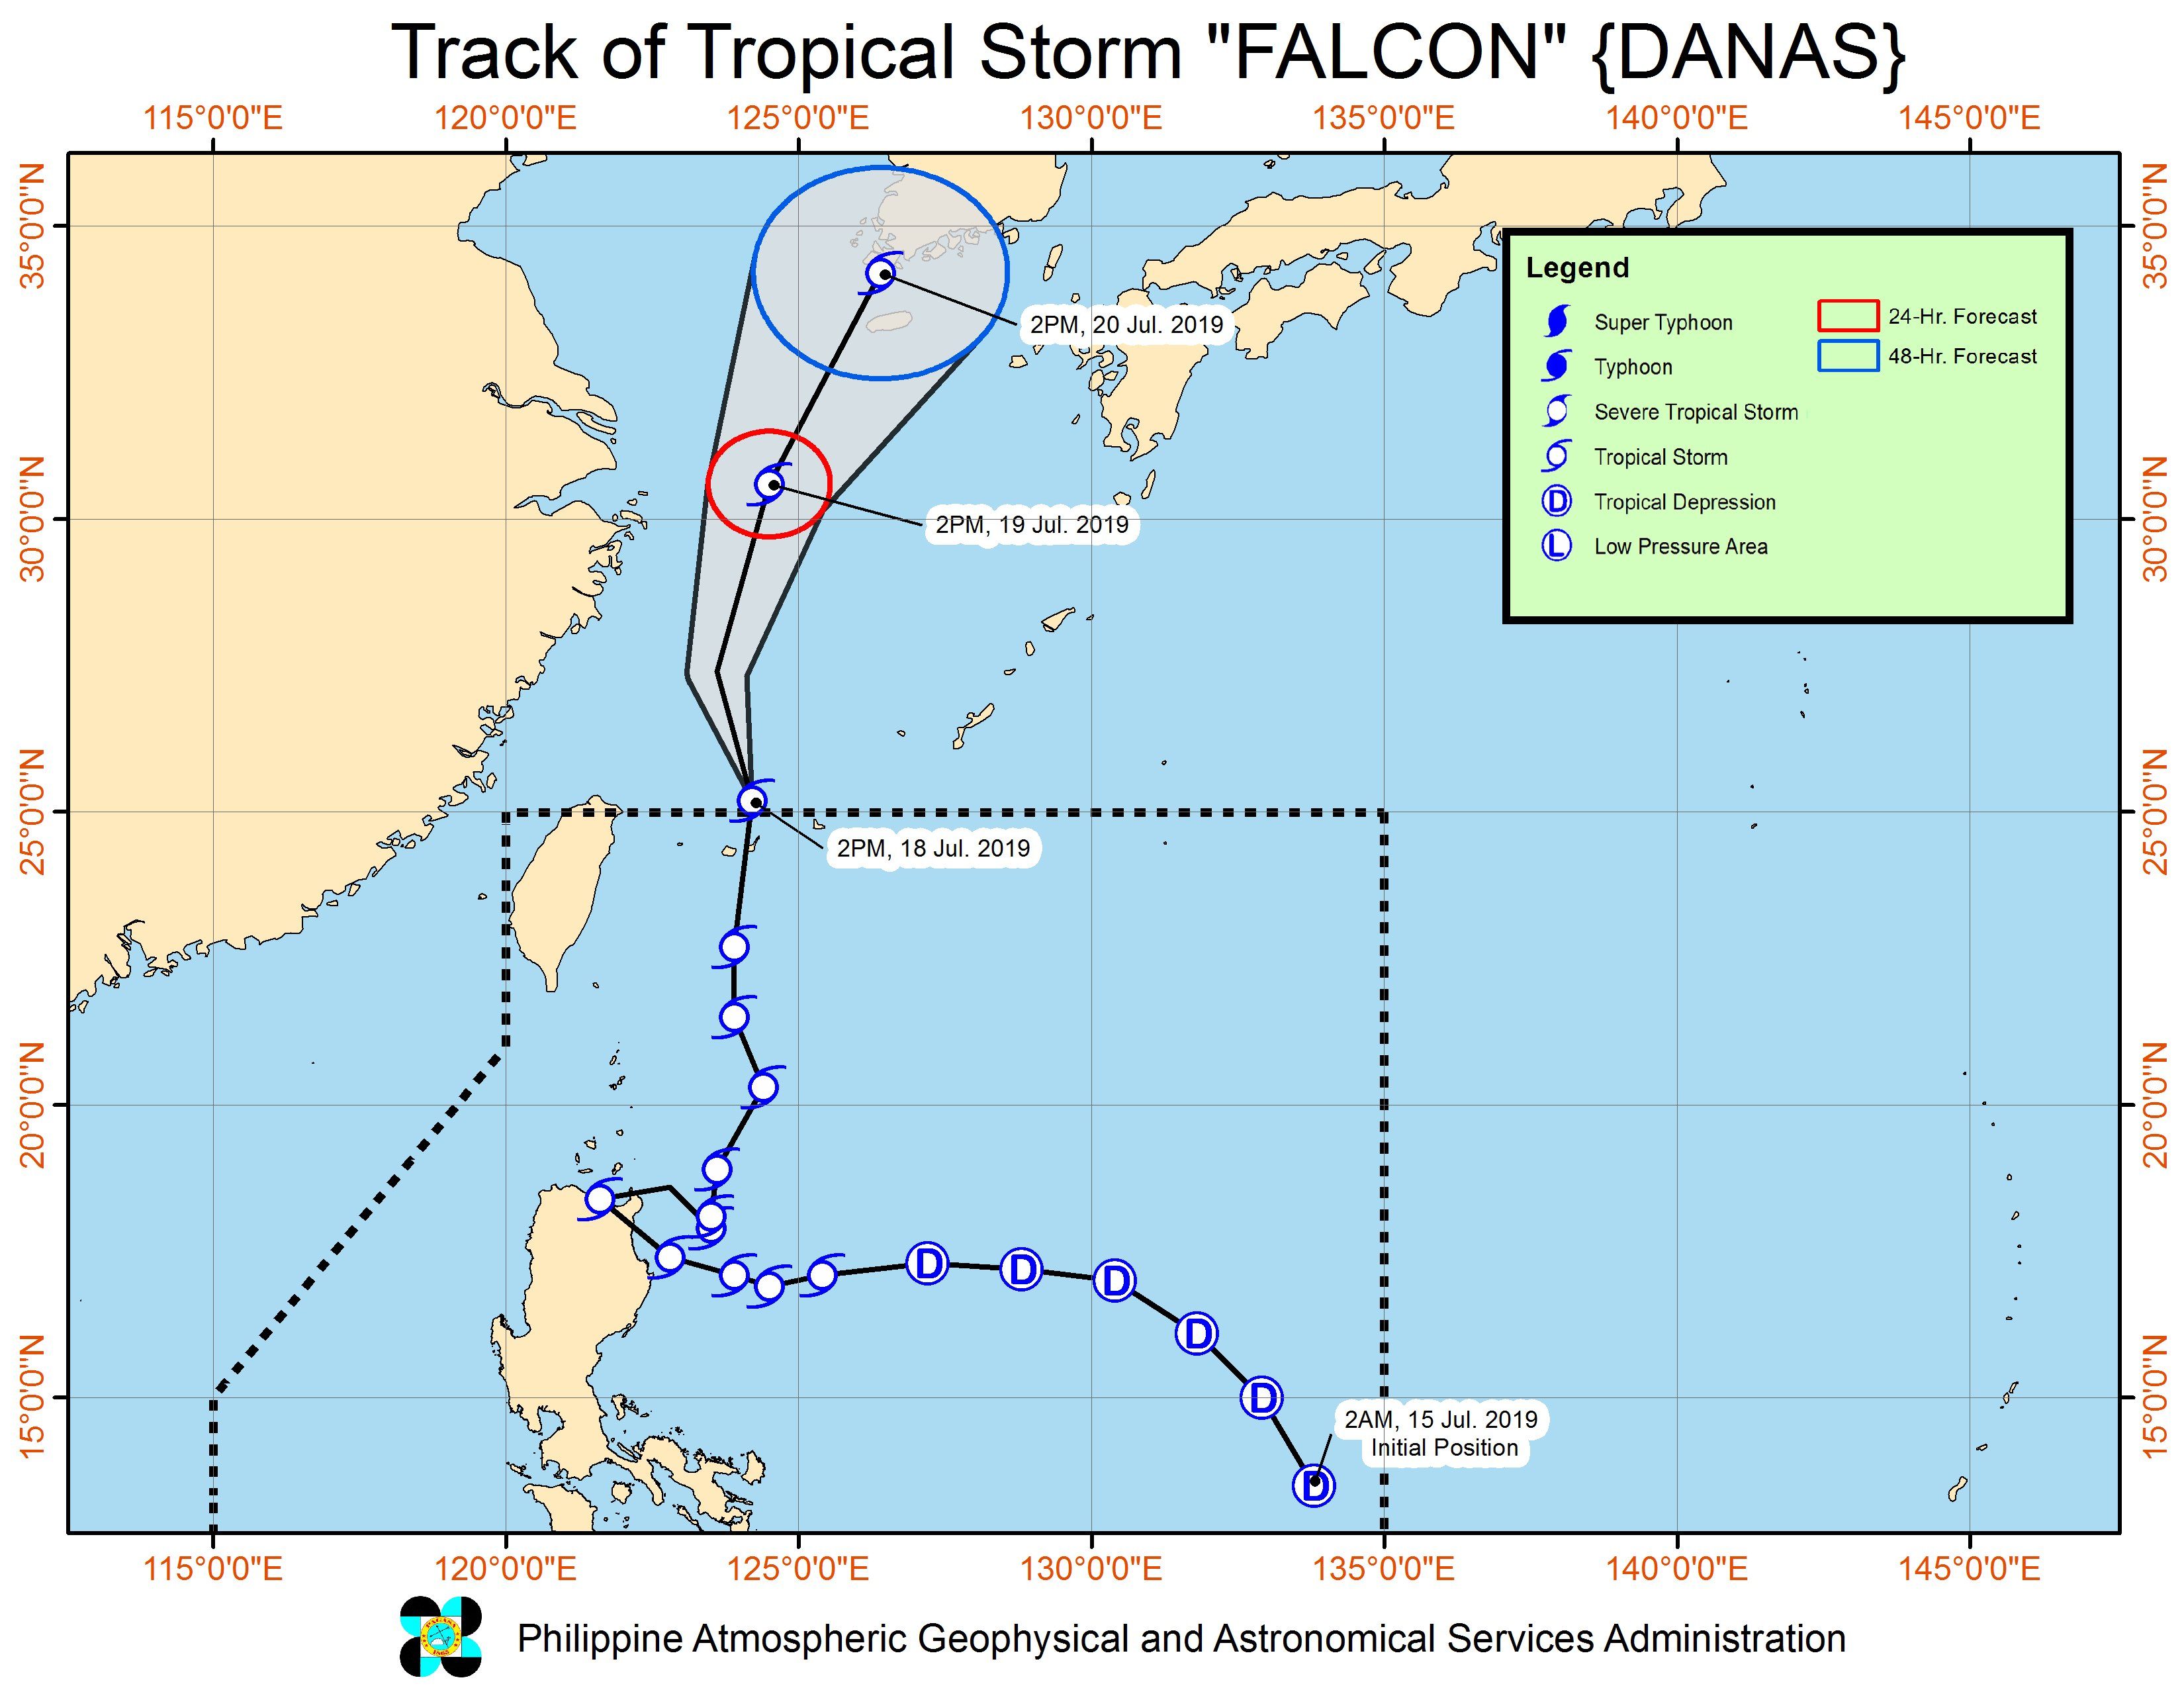 Forecast track of Tropical Storm Falcon (Danas) as of July 18, 2019, 5 pm. Image from PAGASA 